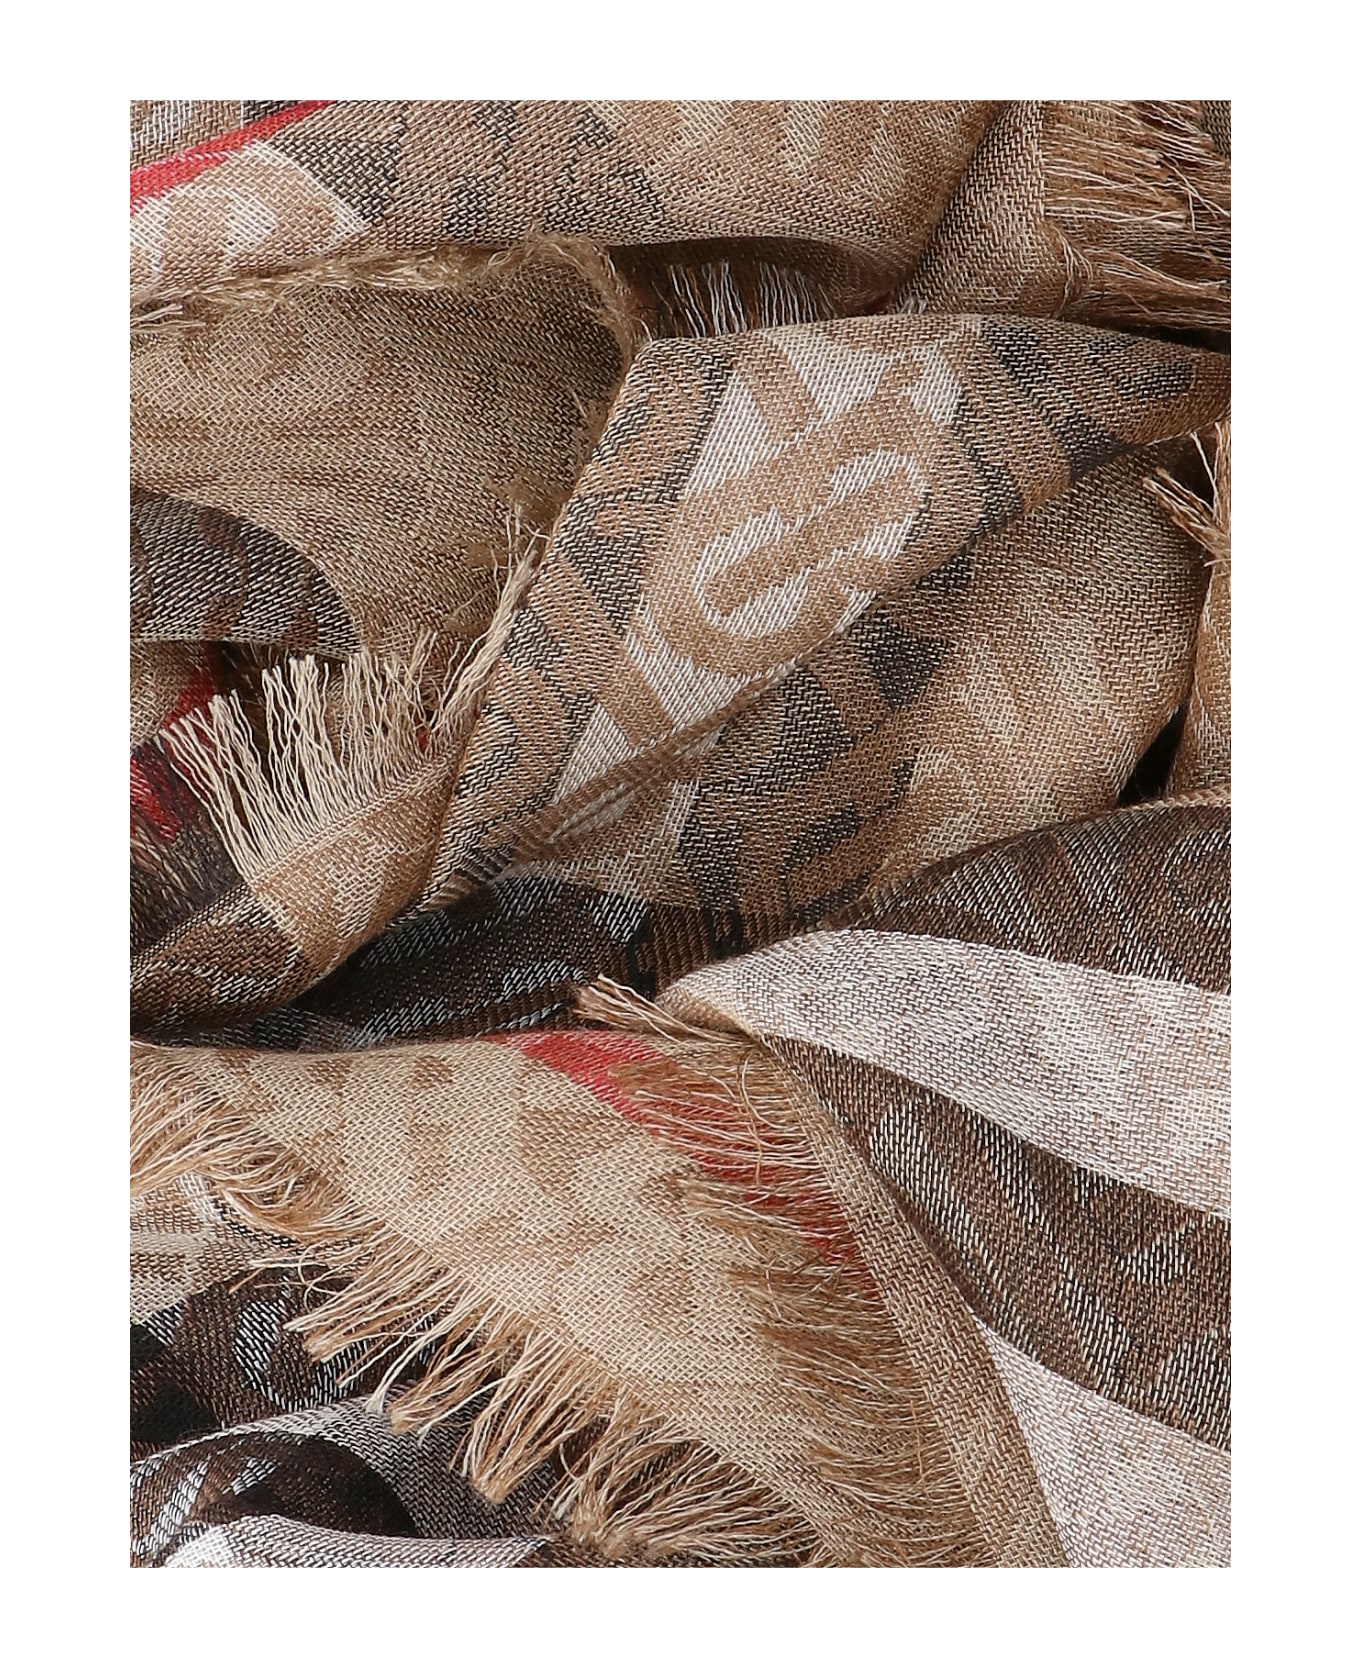 Burberry Embroidered Wool Blend Scarf - Beige スカーフ＆ストール